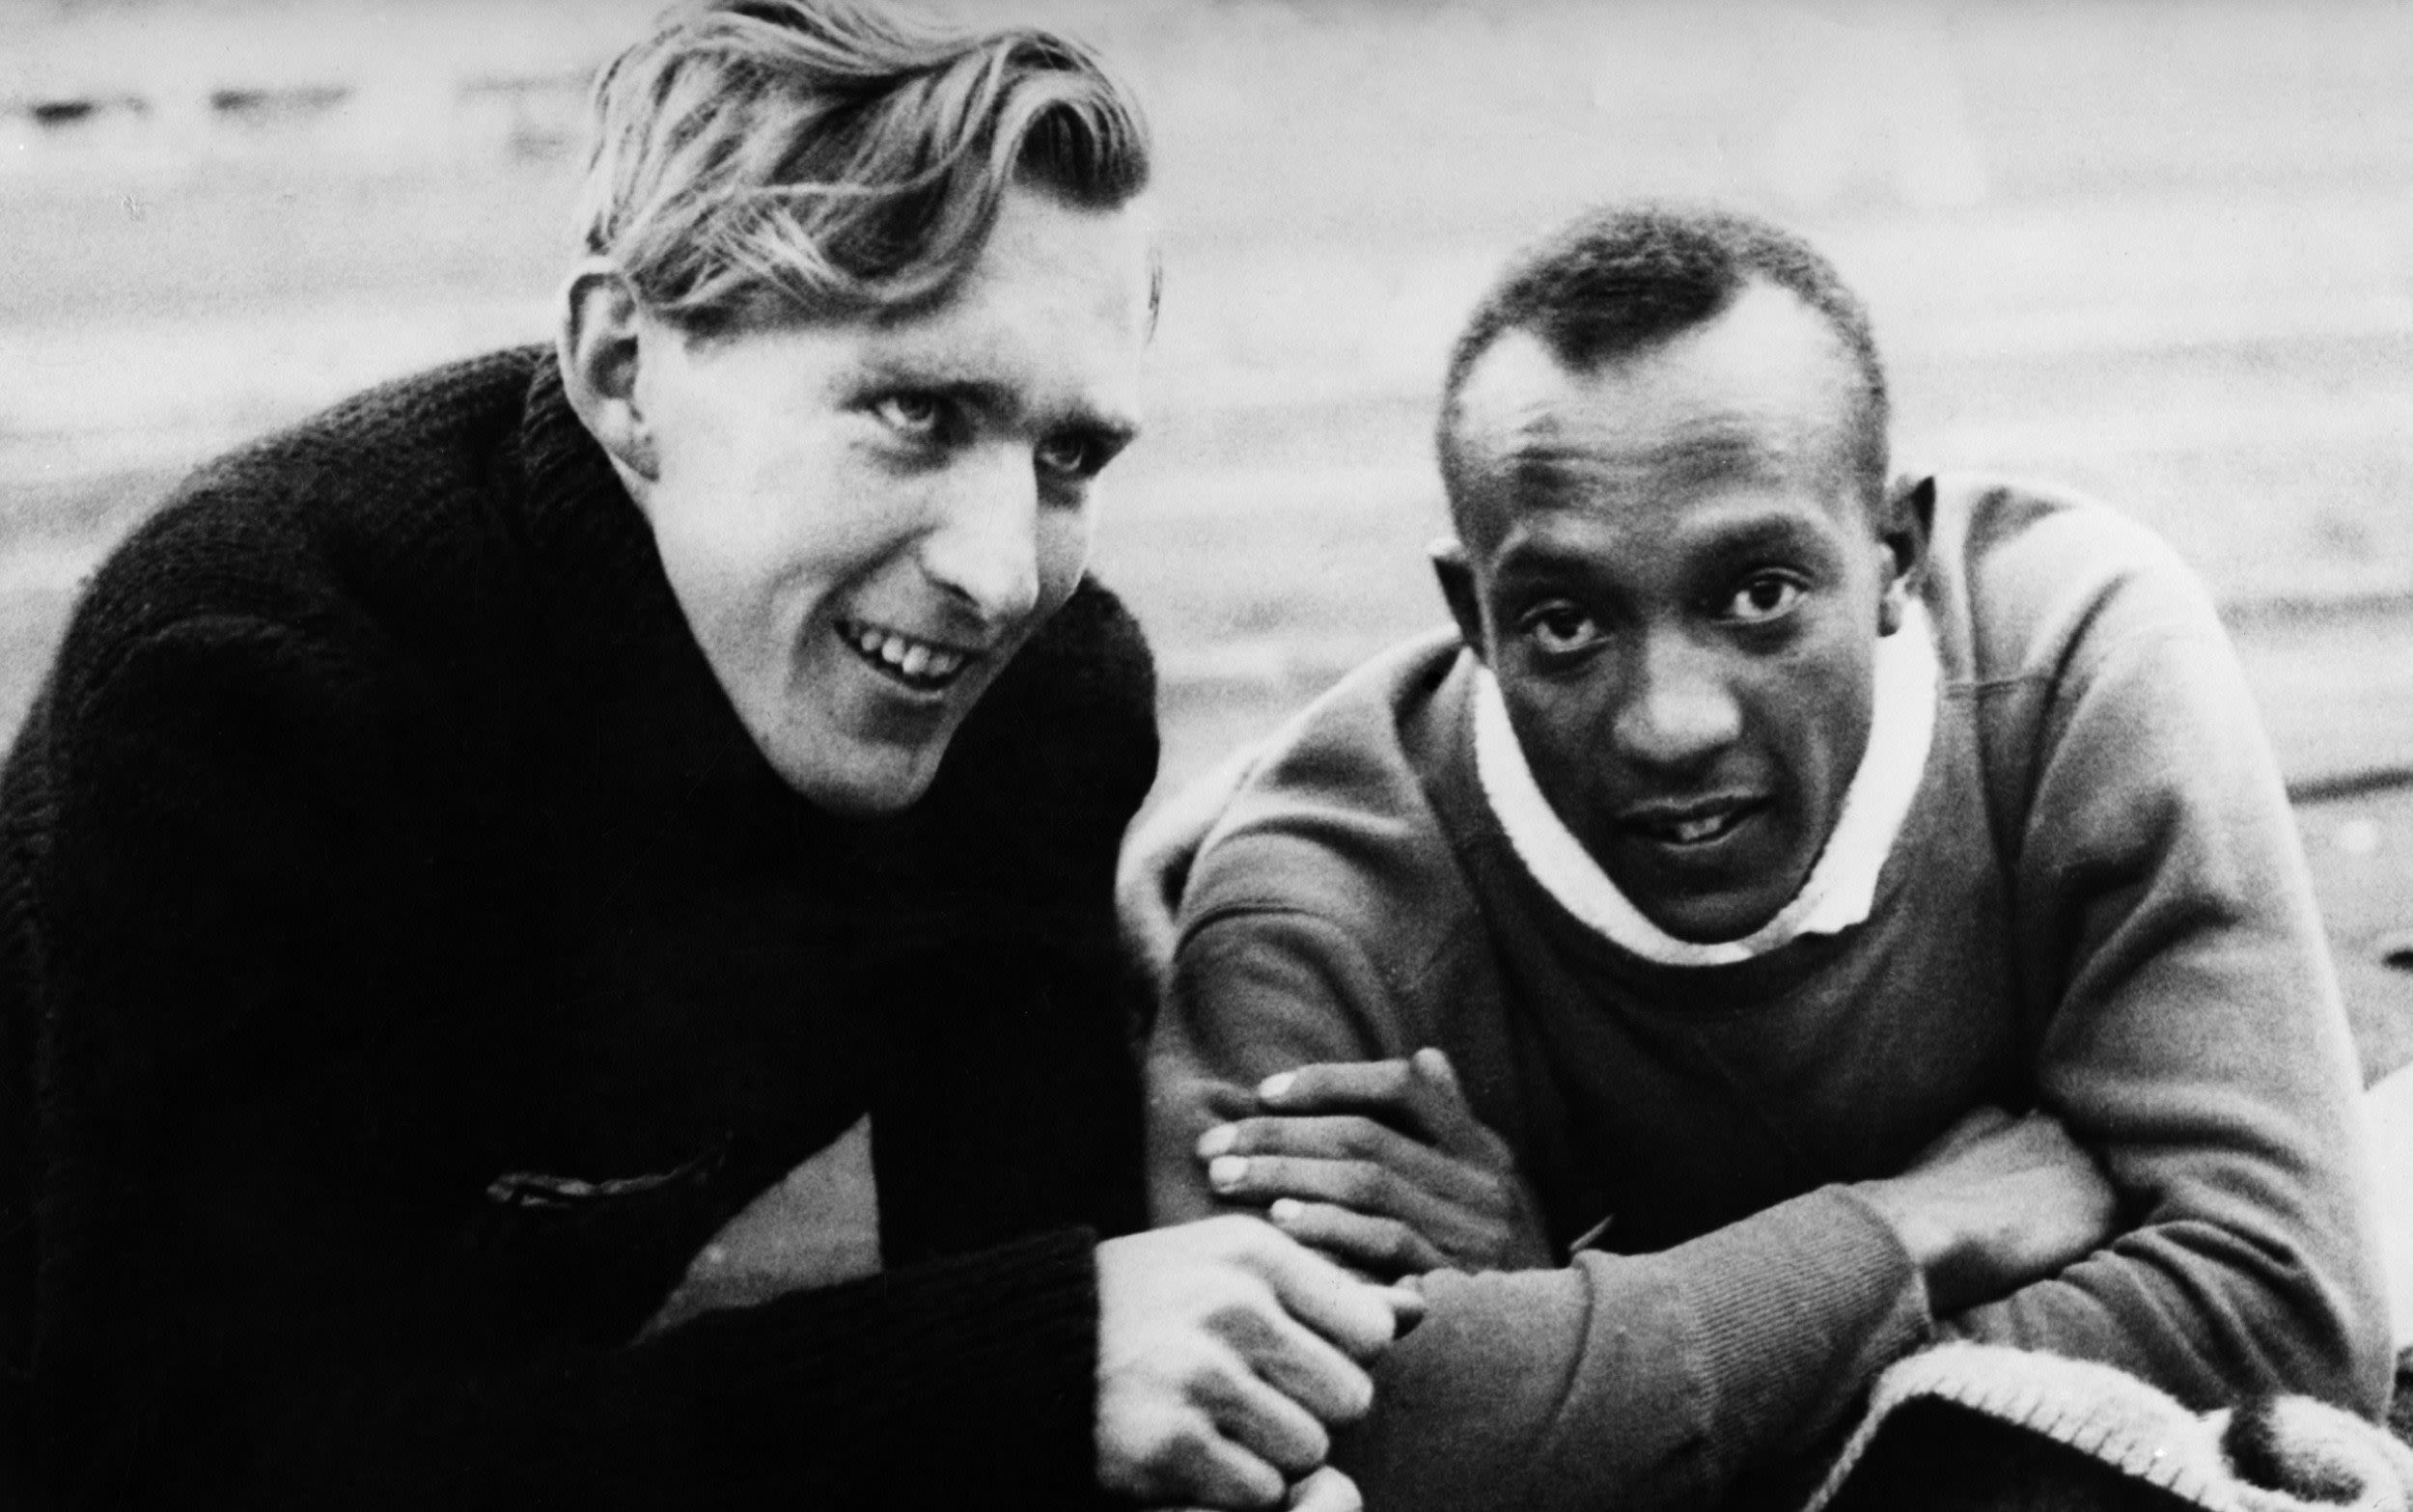 After my grandfather hugged Jesse Owens, the Nazis told him: ‘Never embrace a black man again’